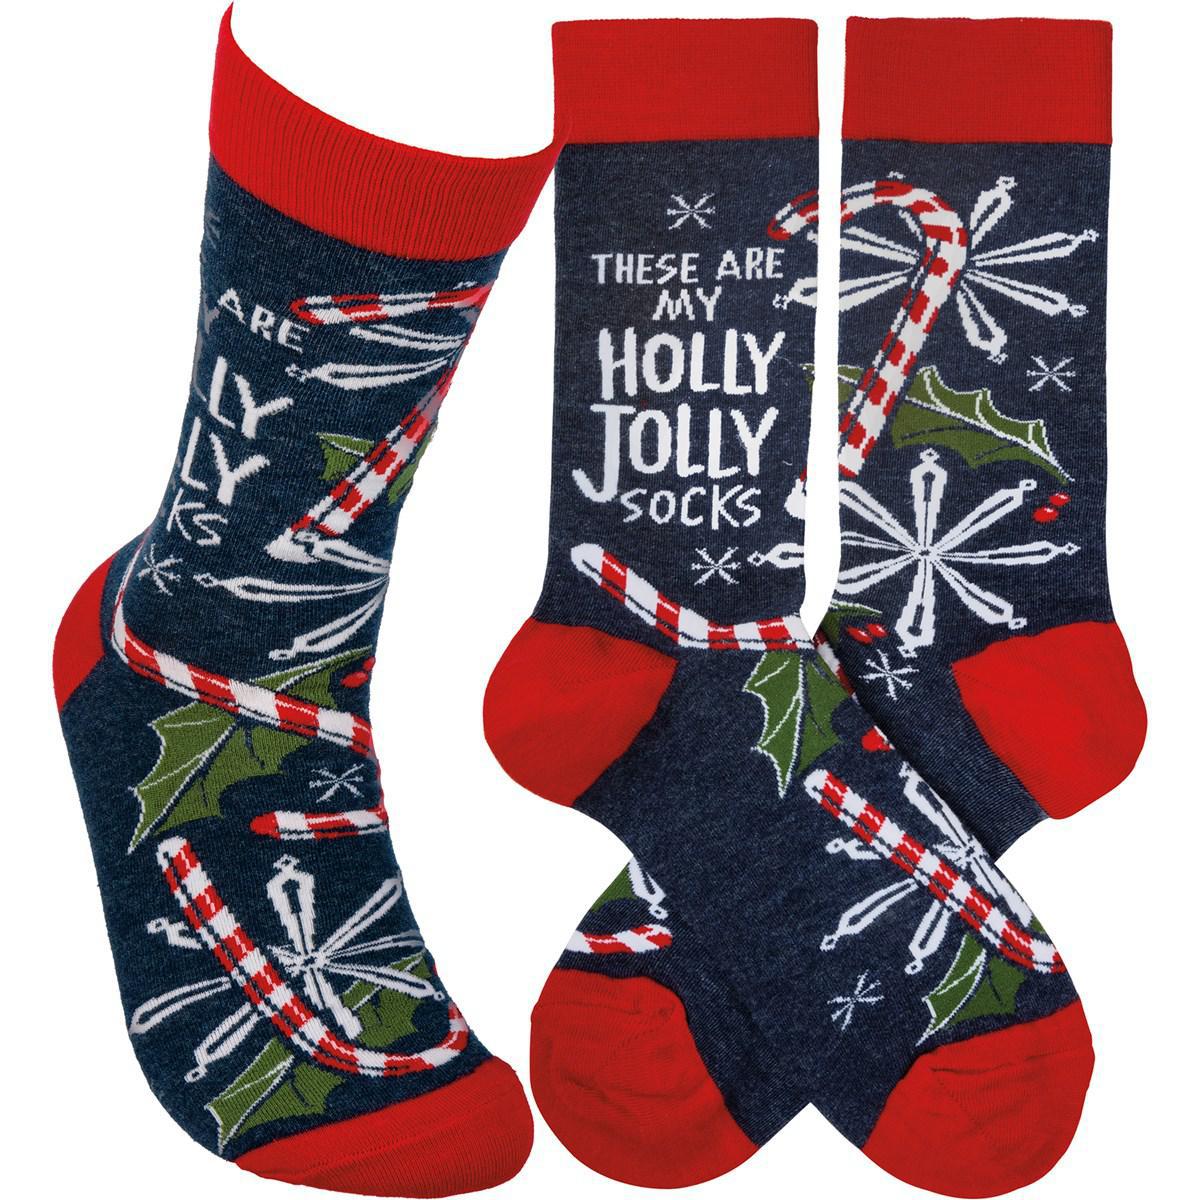 These Are My Holly Jolly Socks